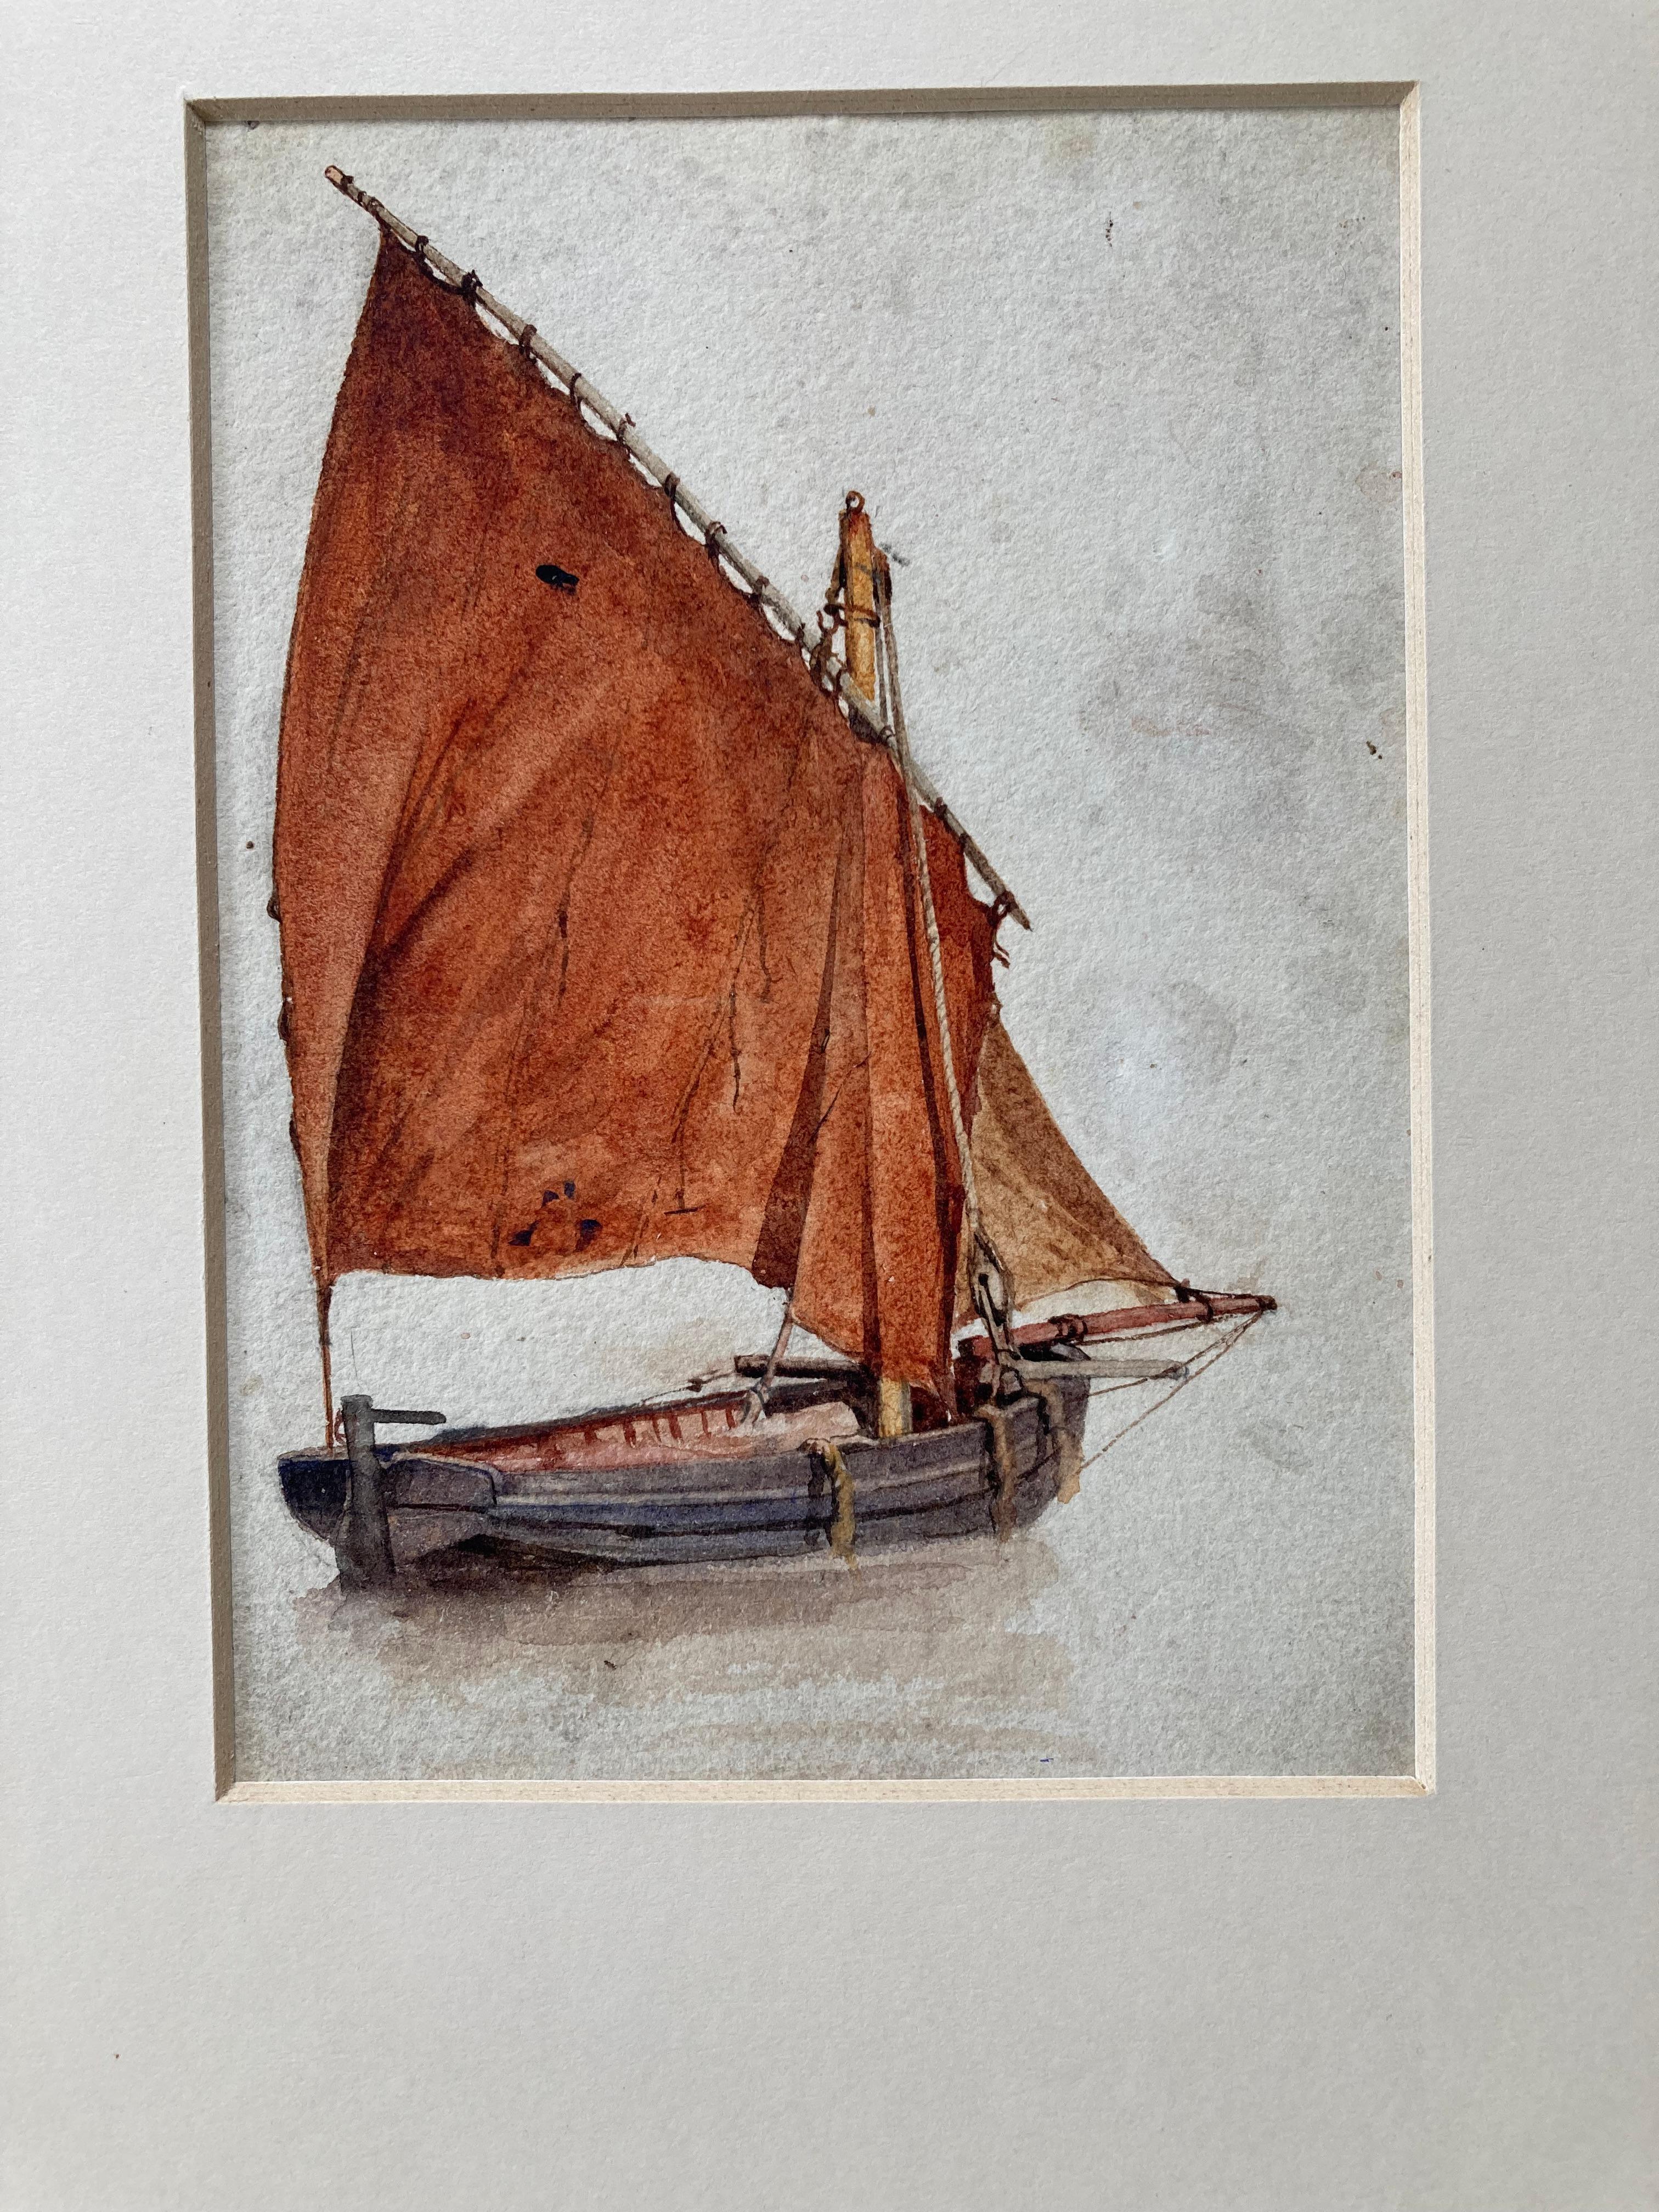 Frederick George Cotman (1850-1920)
Lugger with sails up
Watercolour with trace of pencil
6½ x 4¾ inches

Provenance: Cotman family collection

Frederick George Cotman was born in Ipswich on 14 August 1850. His uncle, John Sell Cotman, was one of